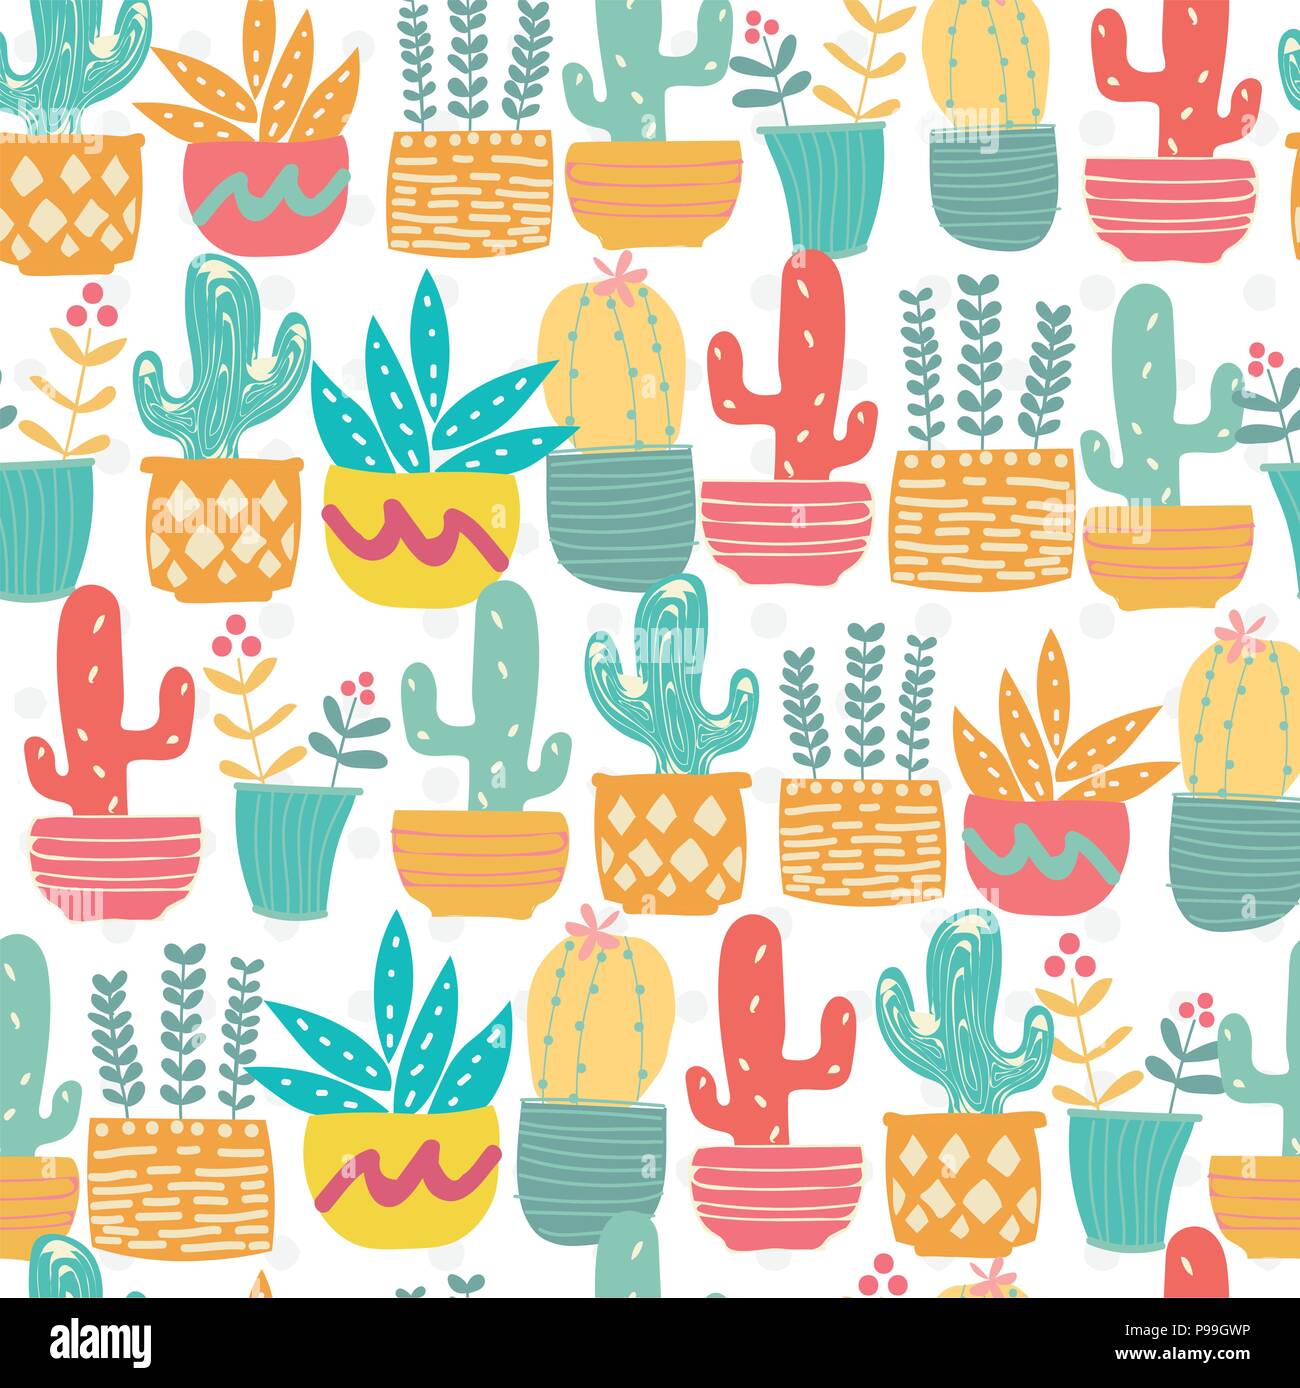 Cute Hand Drawn Doodle Pastel Cactus Pattern Seamless Stock Vector